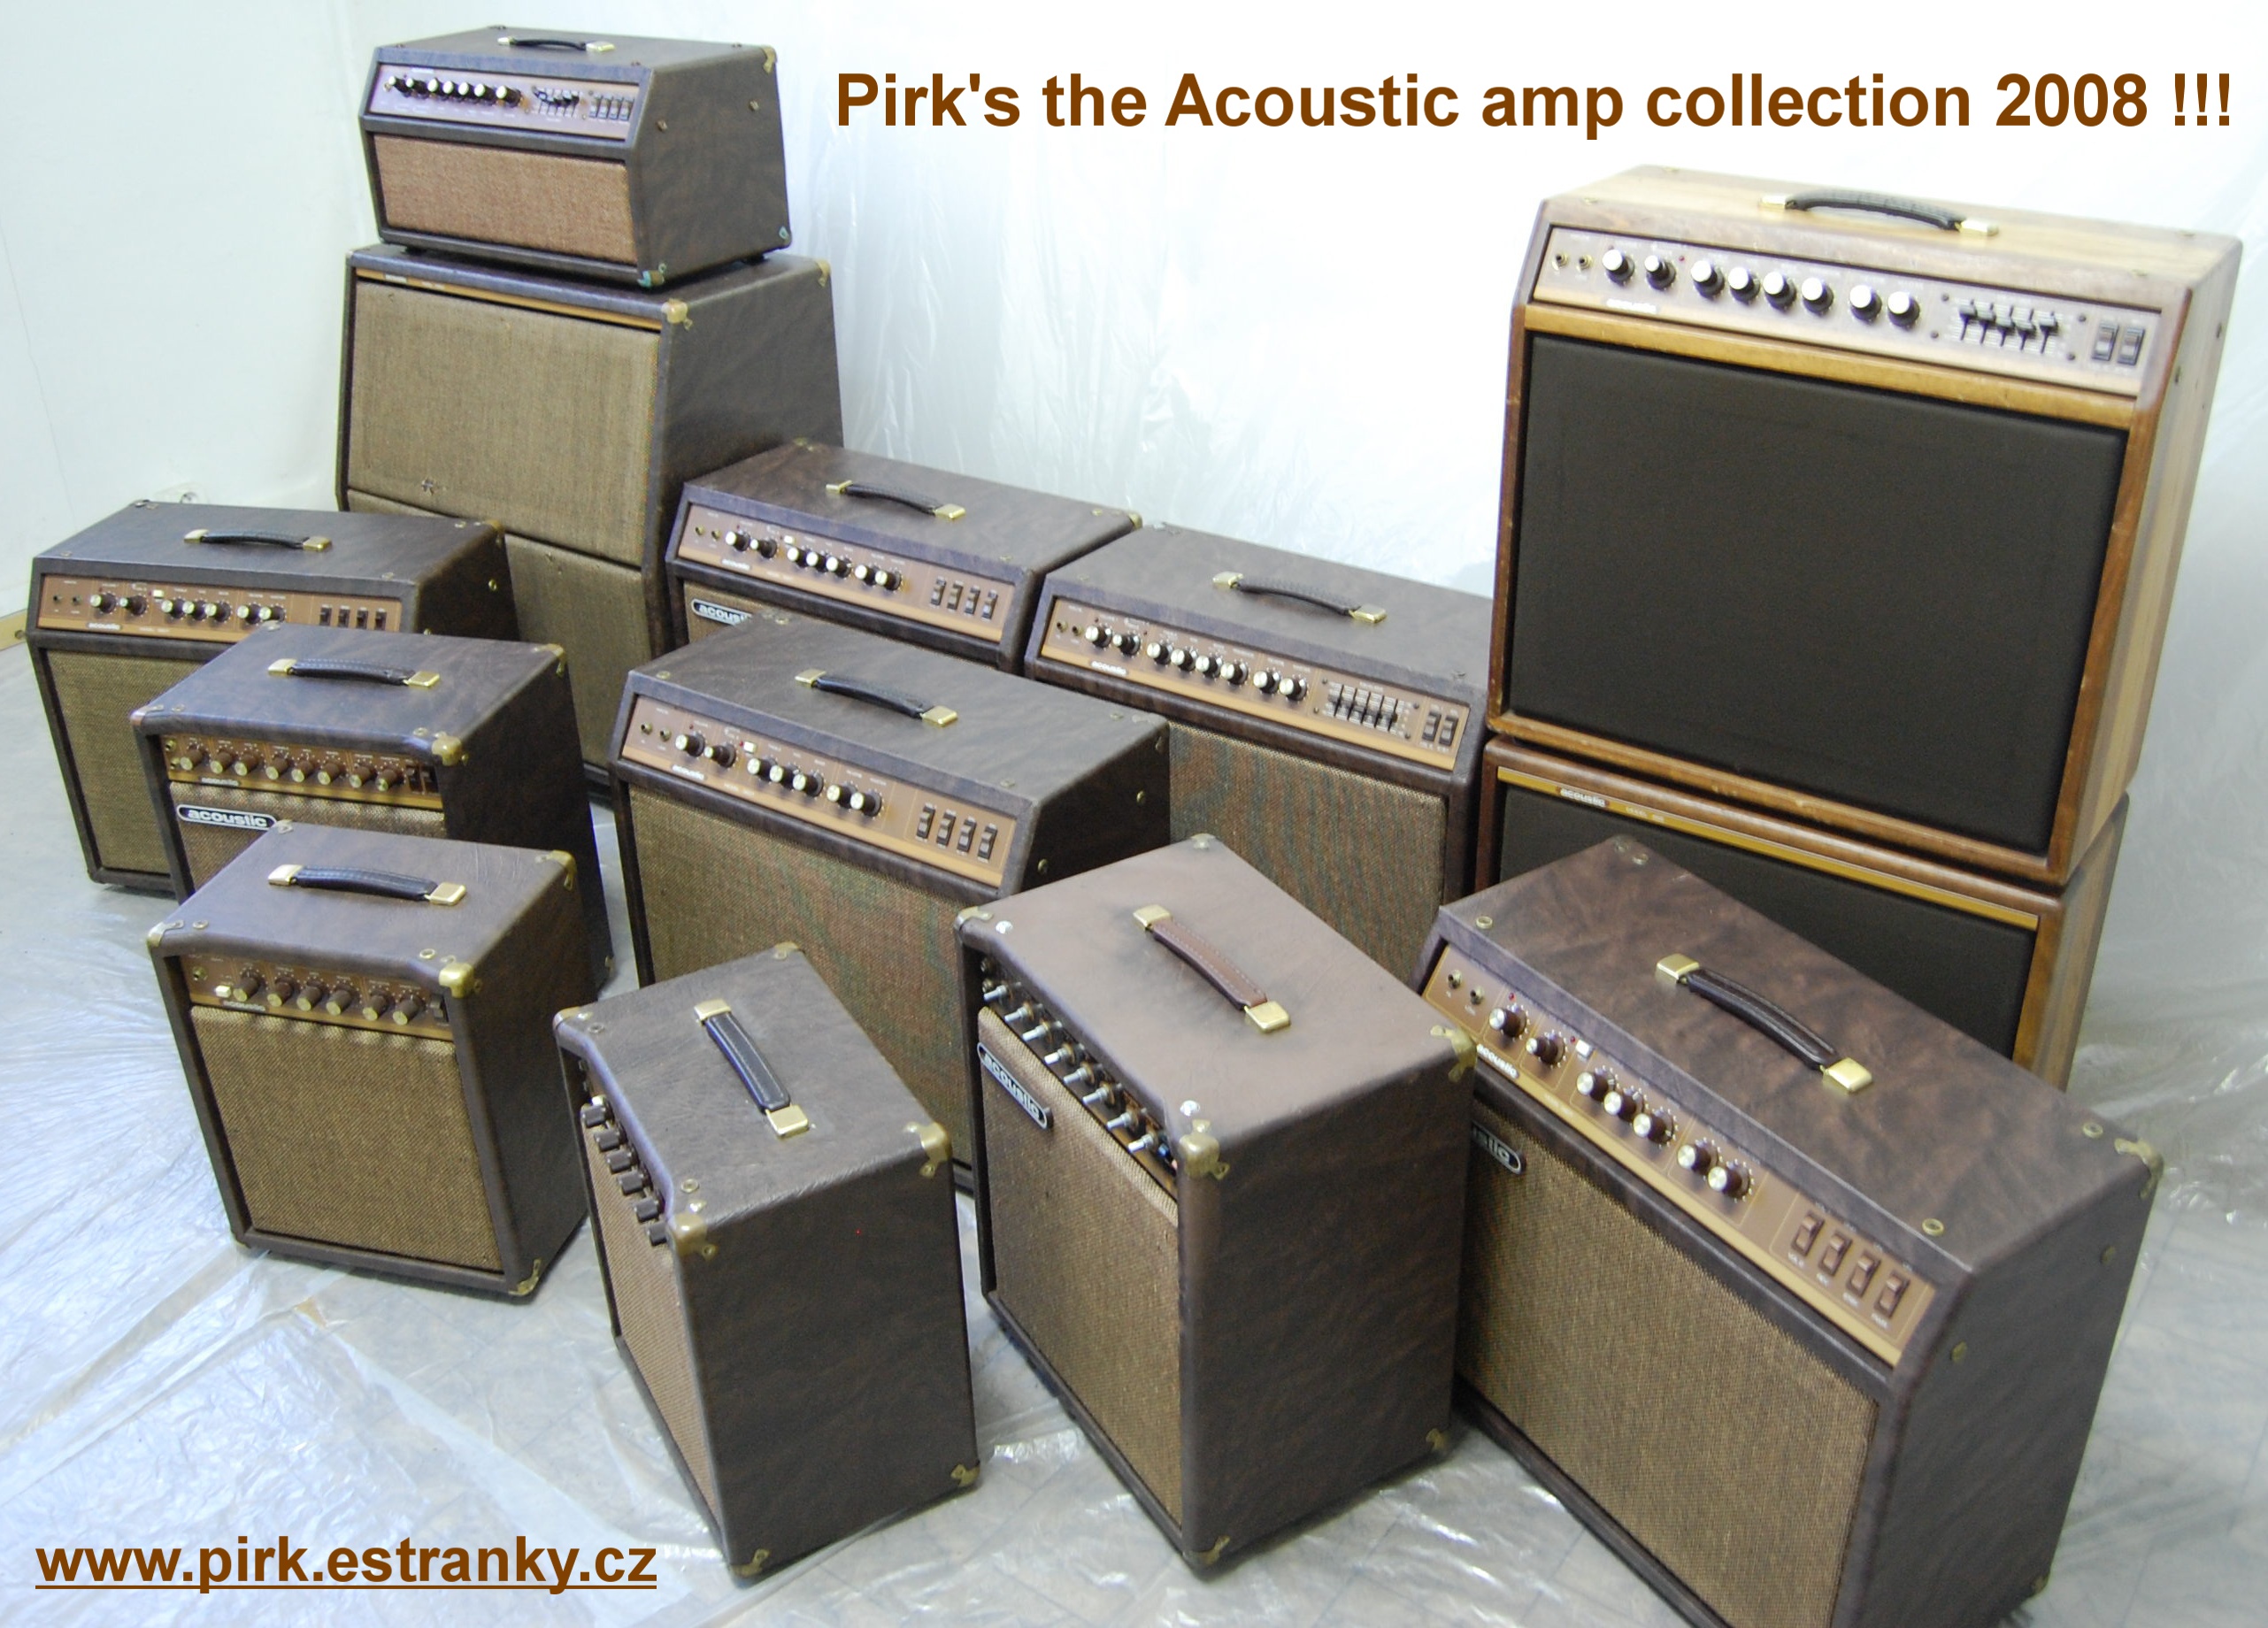 1.Pirks the Acoustic amp collection 2008.jpg